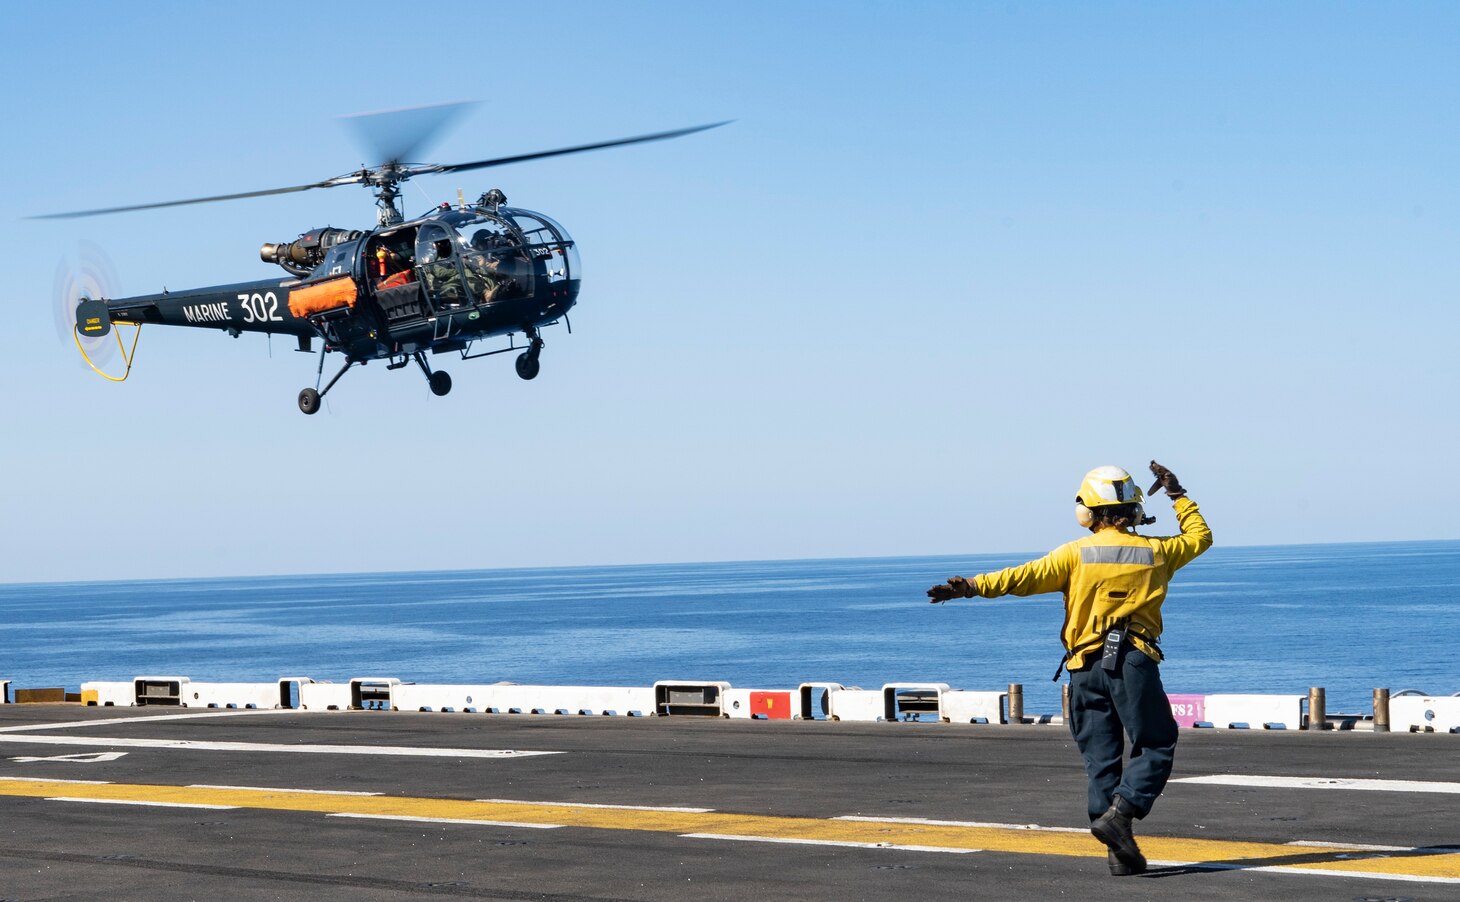 200624-N-SH953-1085
MEDITERRANEAN SEA (June 24, 2020) - A French Alouette helicopter lands on the flight deck of the Wasp-class amphibious assault ship USS Bataan (LHD 5) during joint flight operations, June 24, 2020. Bataan is conducting operations in U.S. 6th Fleet in support of regional allies and partners, and U.S. national security interests in Europe and Africa. (U.S. Navy photo by Mass Communication Specialist 1st Class Kathryn E. Macdonald/Released)